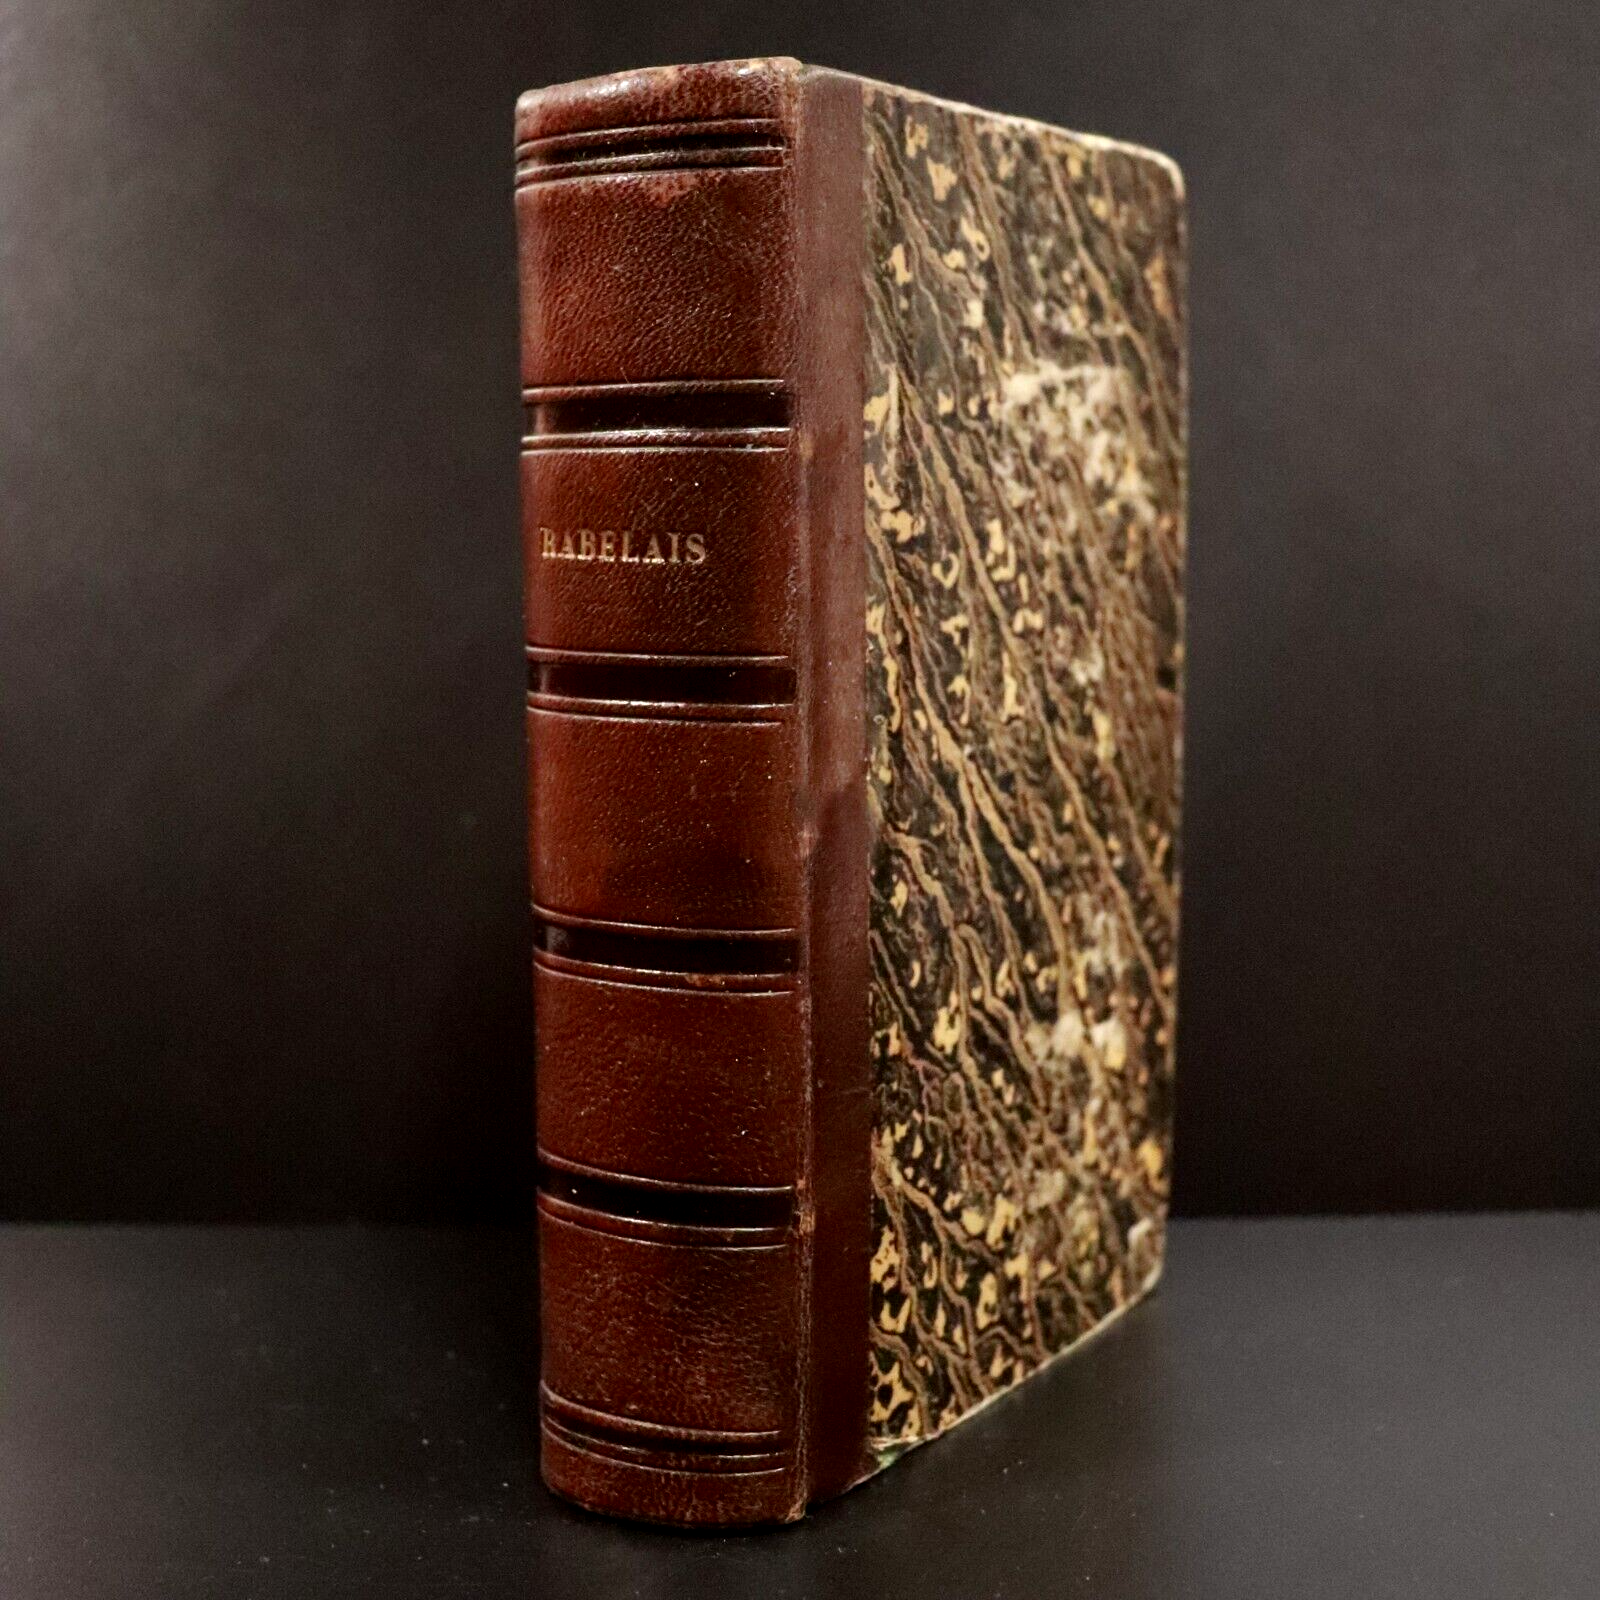 1854 Oeuvres De Rabelais by Louis Barre Antiquarian French Literature Book